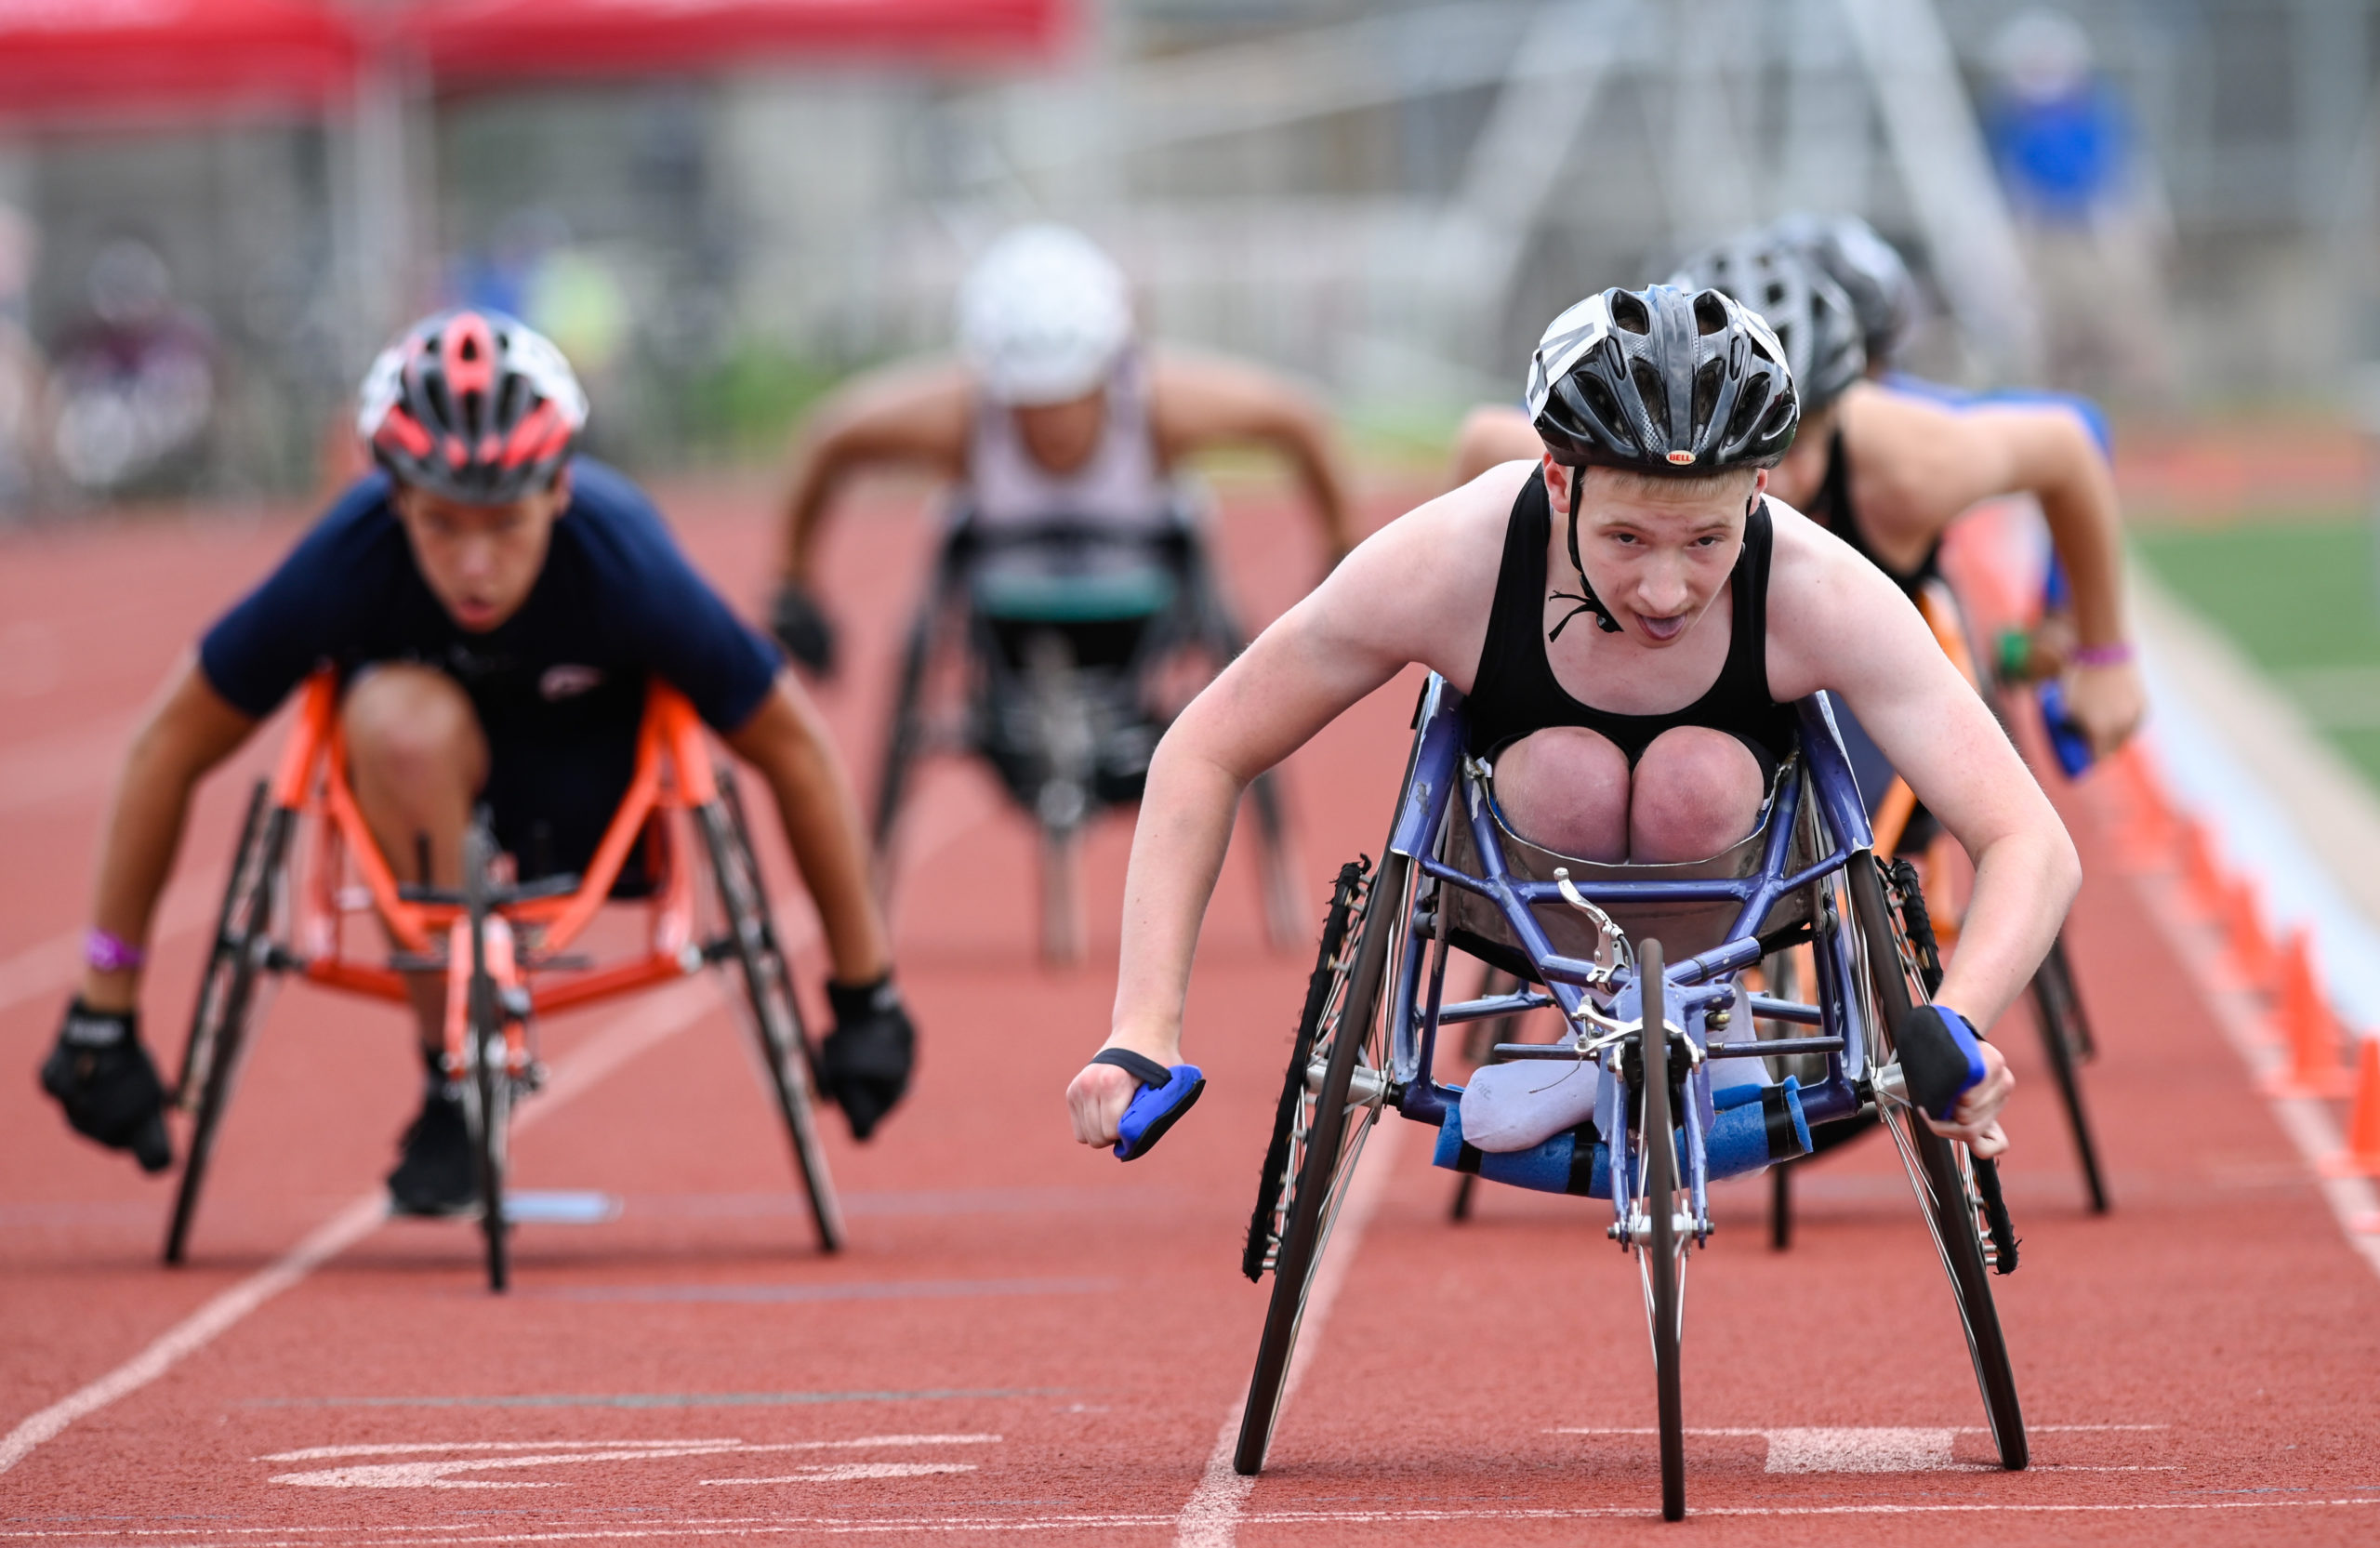 Athletes competing in a race using racing wheelchairs